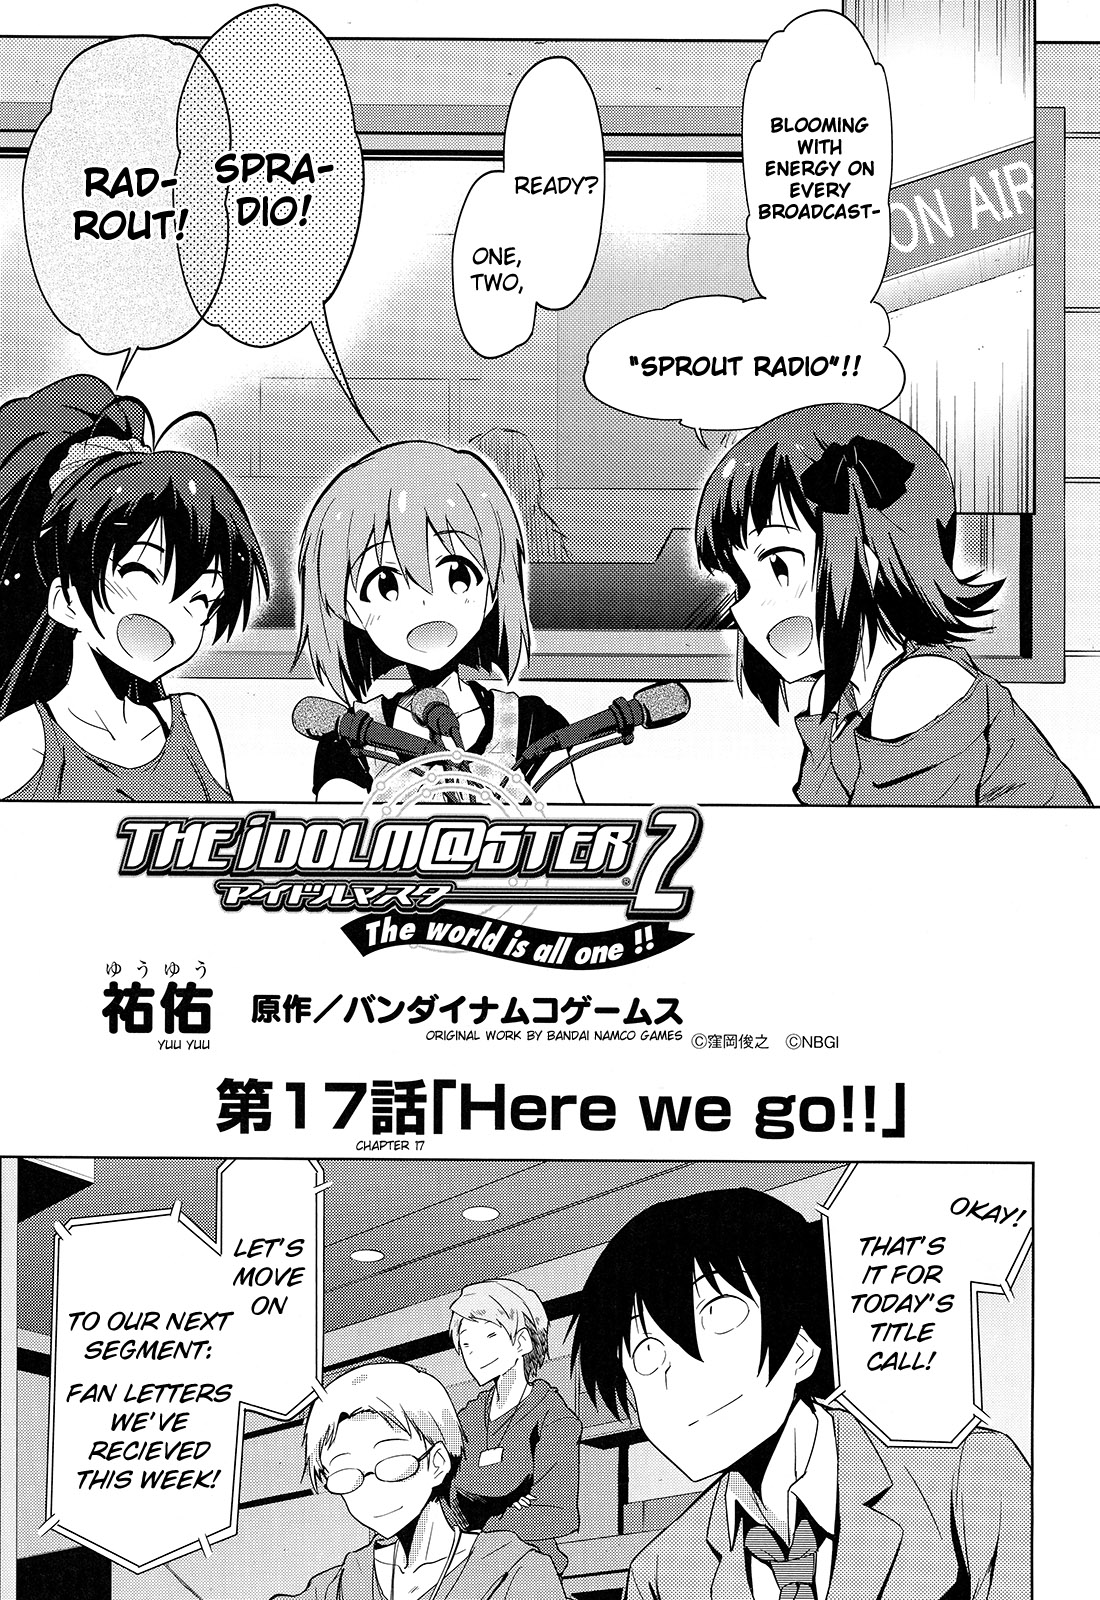 THE iDOLM@STER 2 The world is all one!! Vol. 2 Ch. 17 Here we go!!